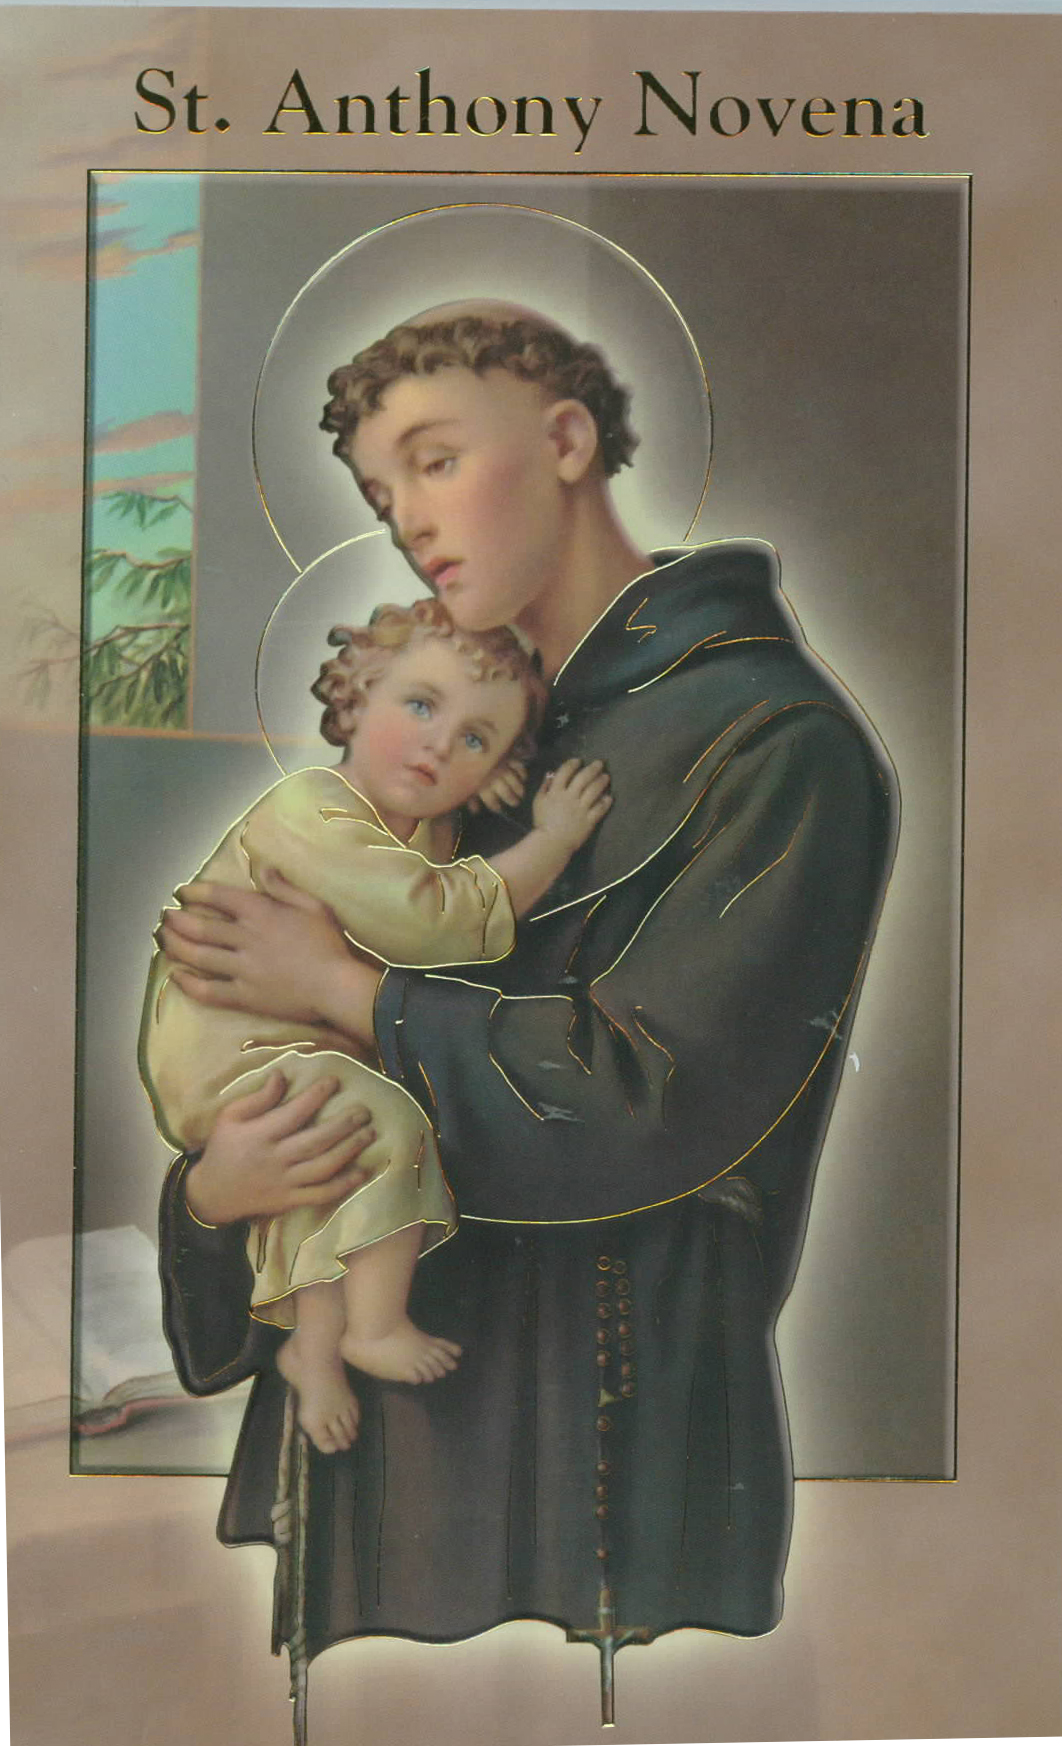 St. Anthony Novena & Prayers Book 12-2432-300 is 3.75" x 5-7/8" and 24 pages beautifully illustrated with Italian Fratelli-Bonella Artwork and original text by Daniel A. Lord, S.J.